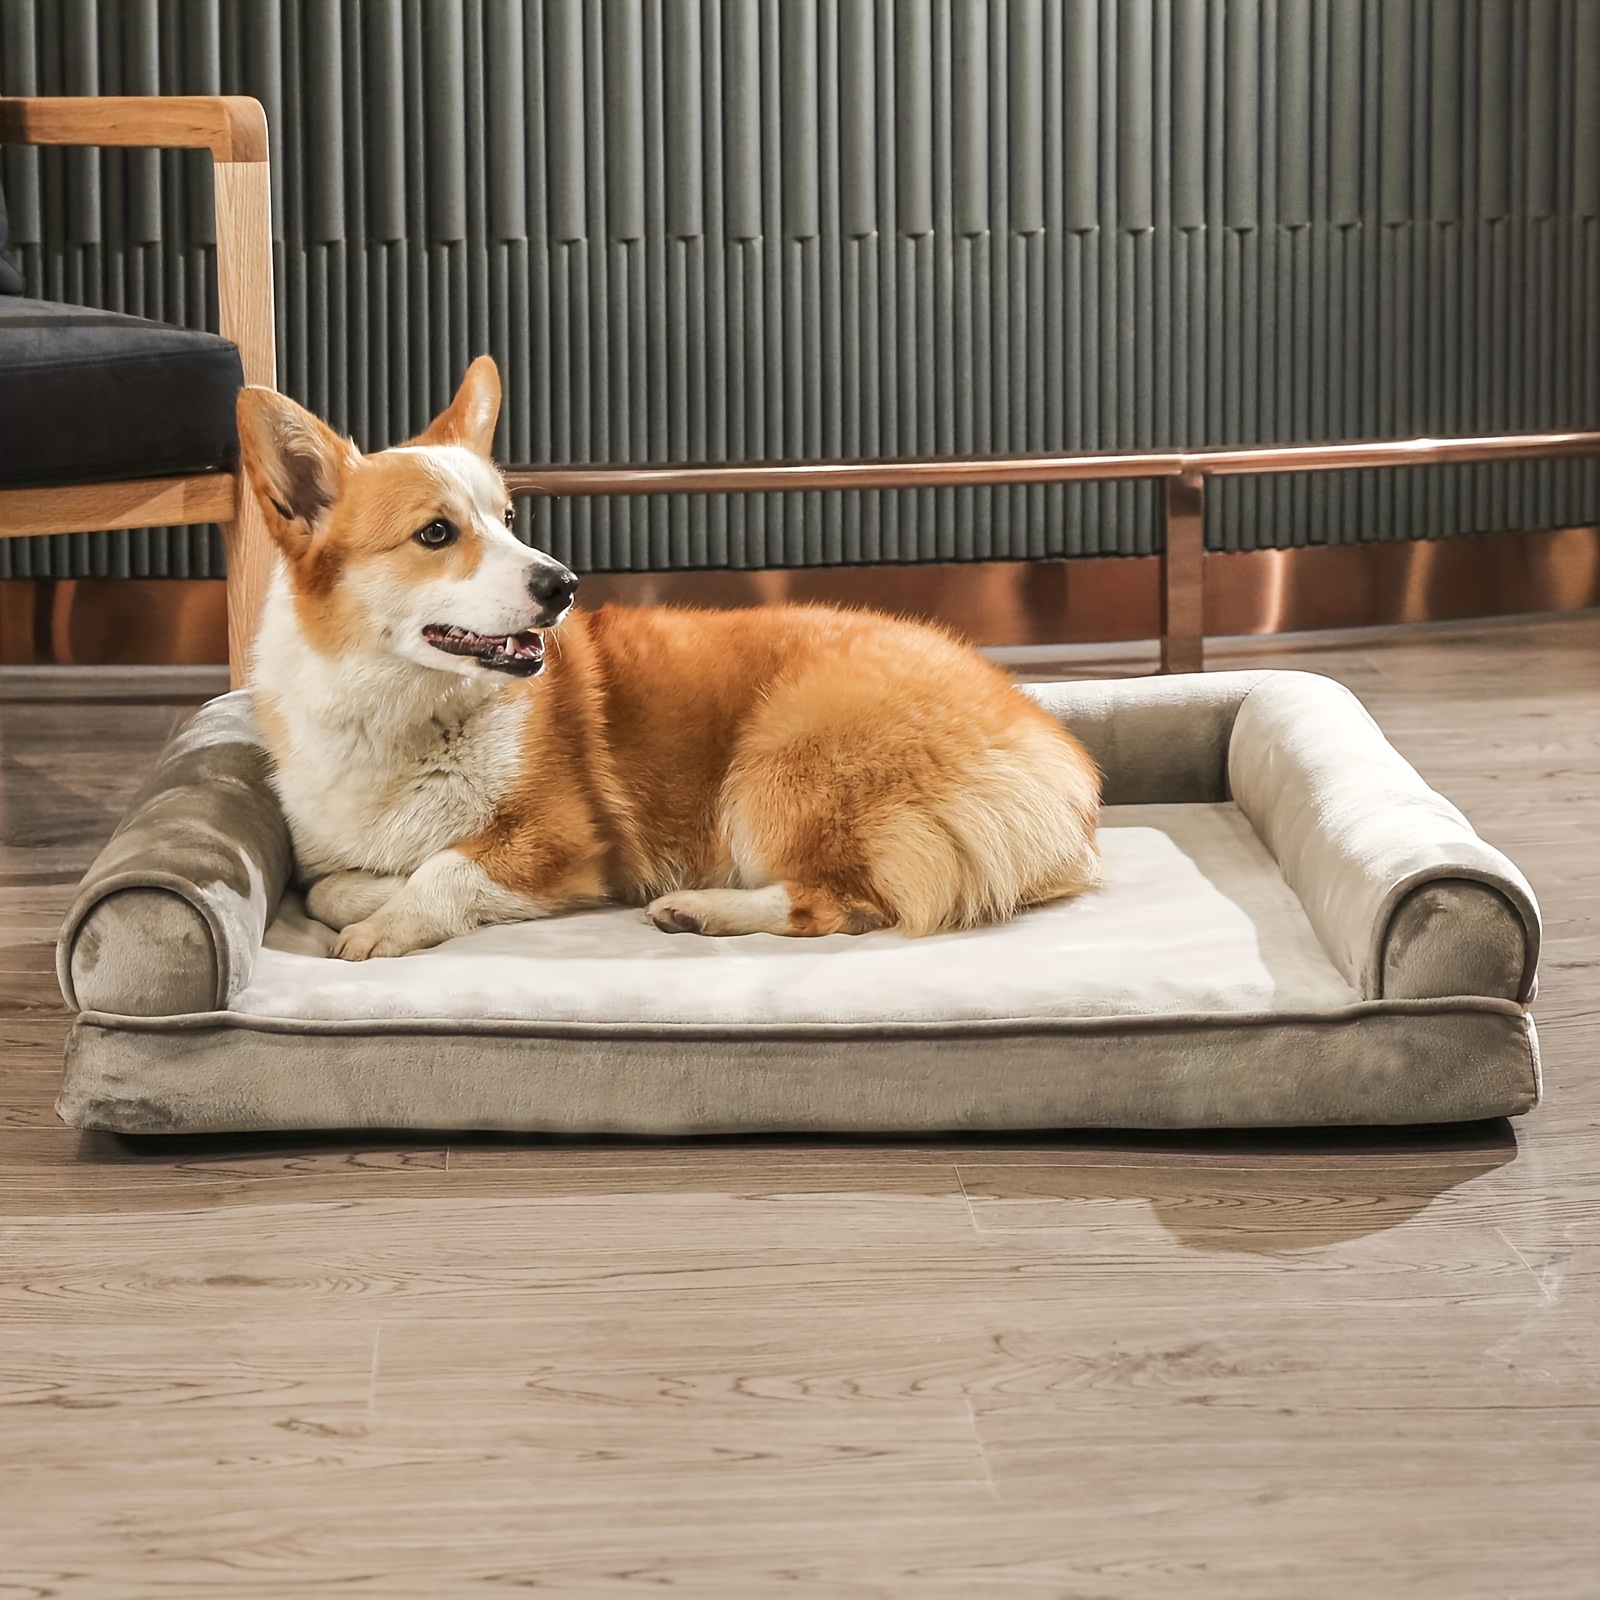 

Orthopedic Sofa Dog Bed, Ultra Comfortable Dog Sleeping Nest, Breathable & Waterproof Pet Bed With Extra Head And Neck Support, Removable Washable Cover & Nonslip Bottom